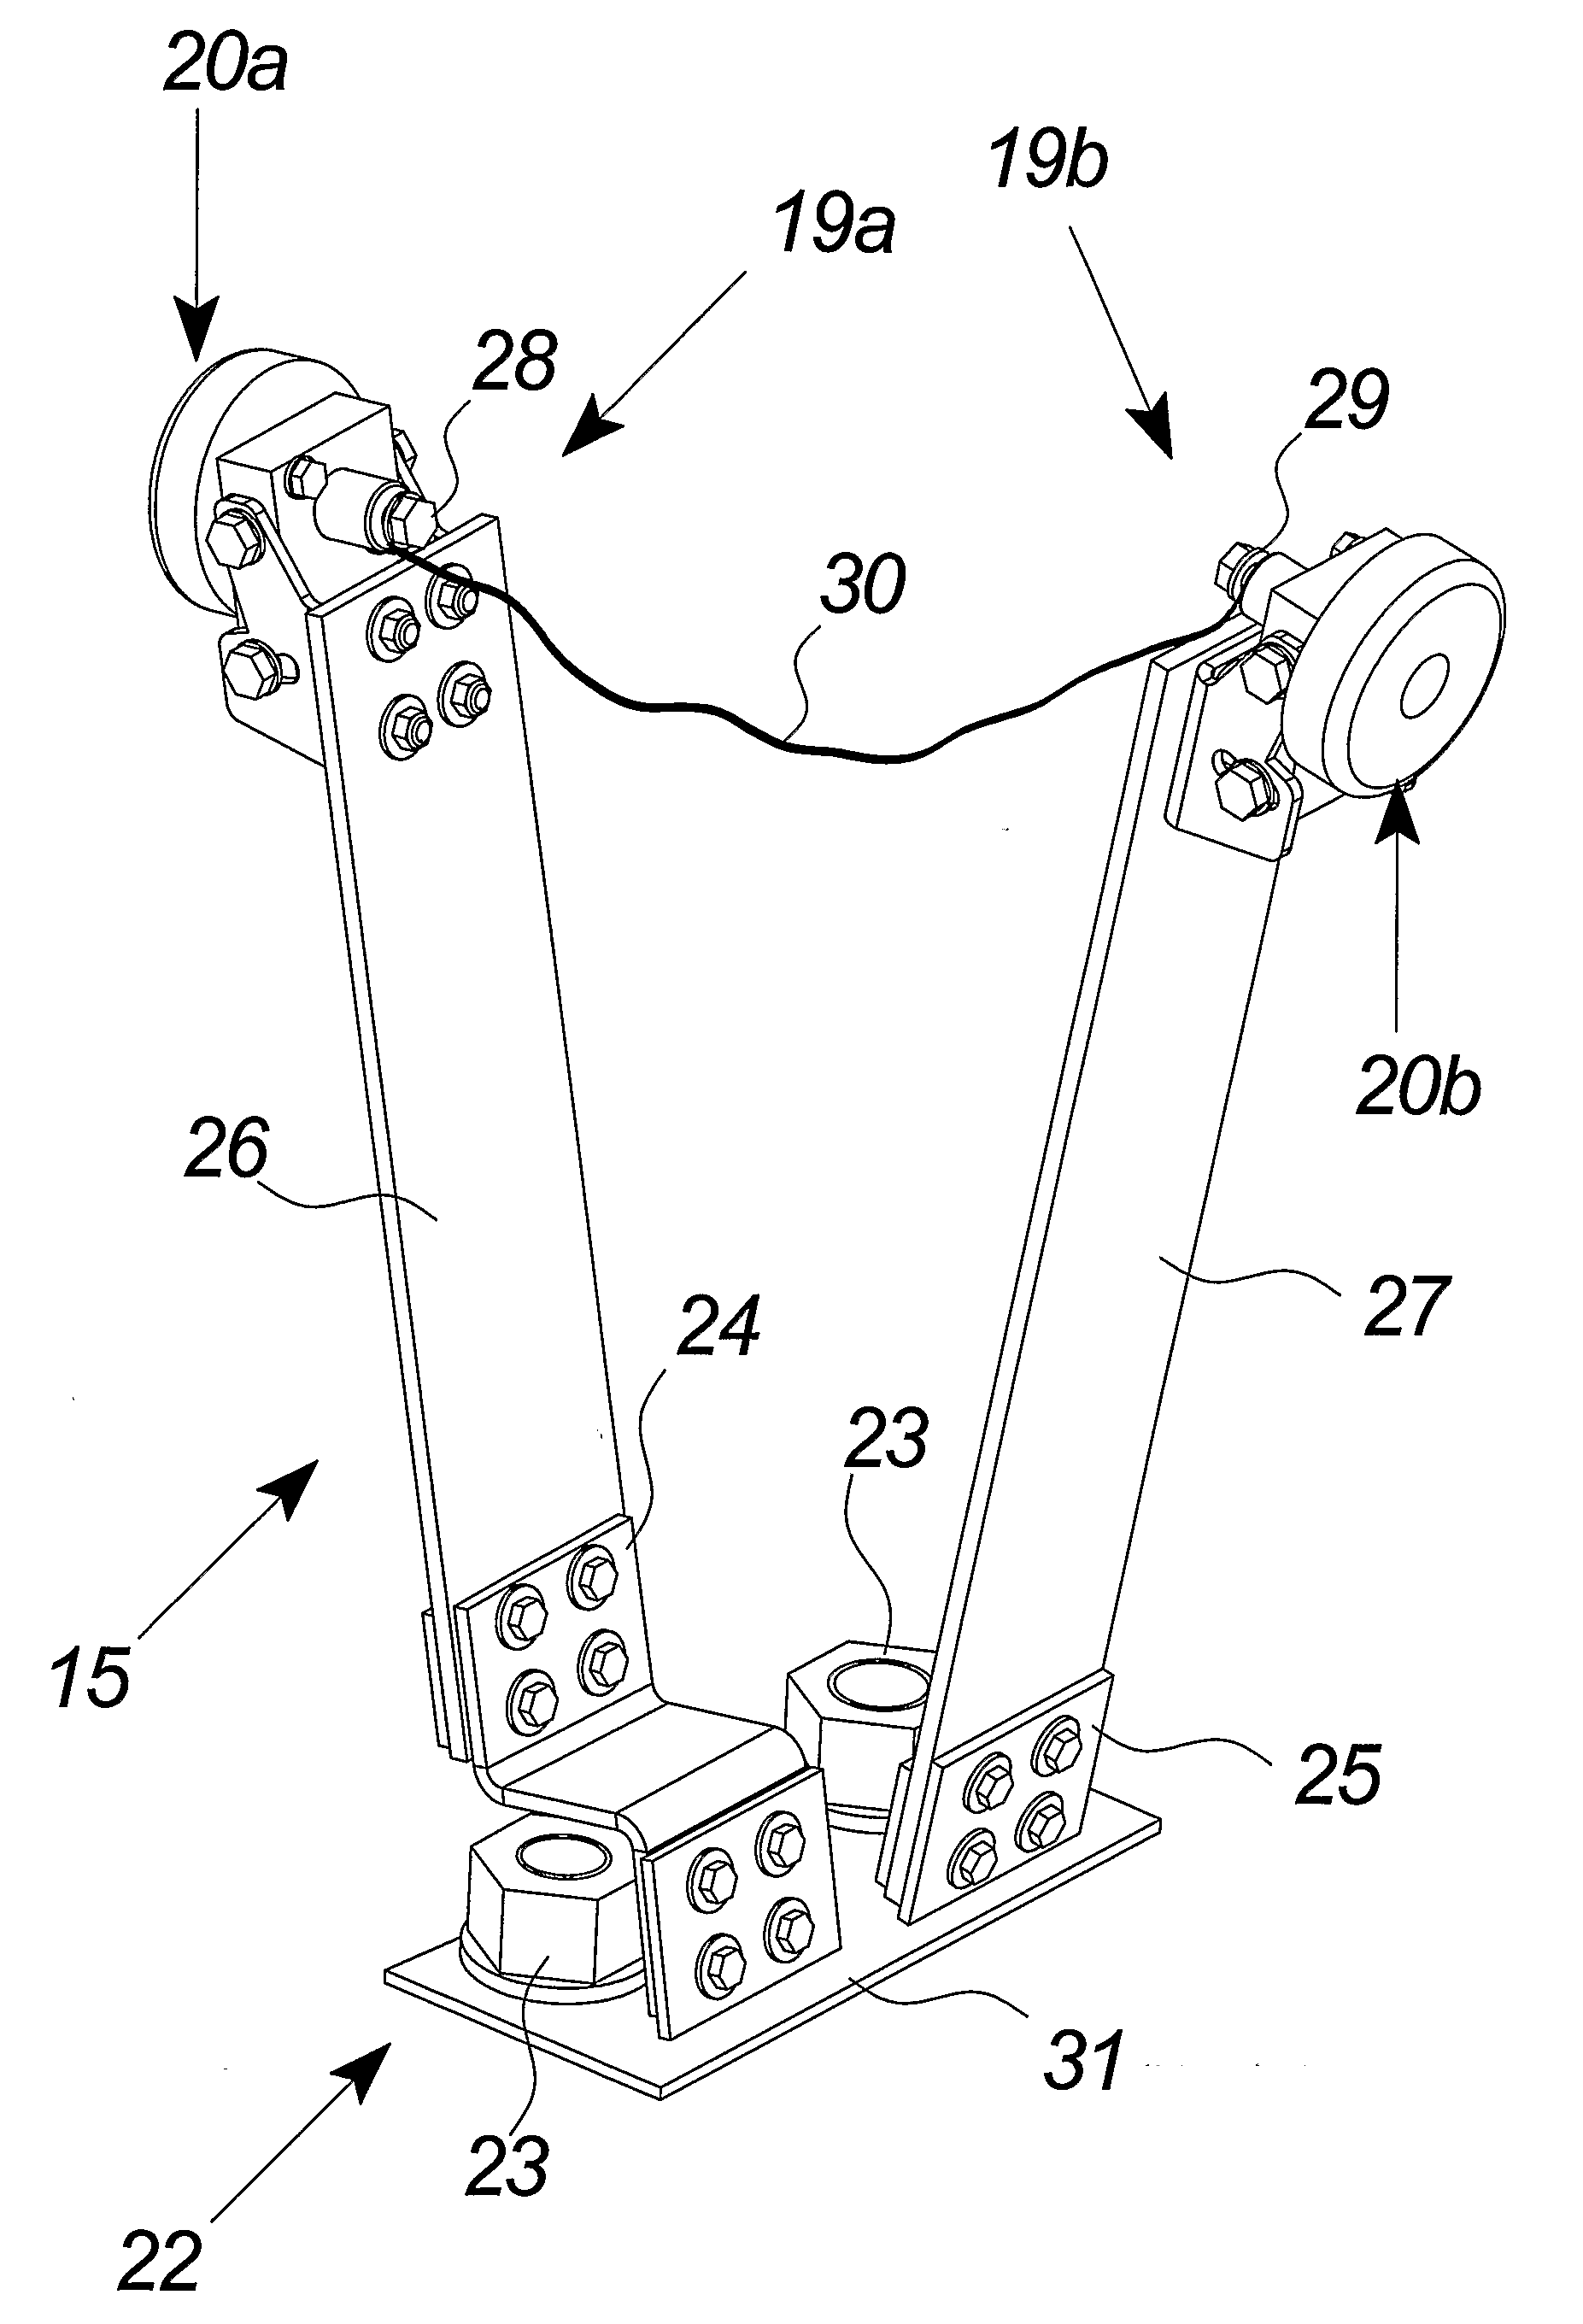 Wind Turbine Lightning Connection Means Method and Use Hereof